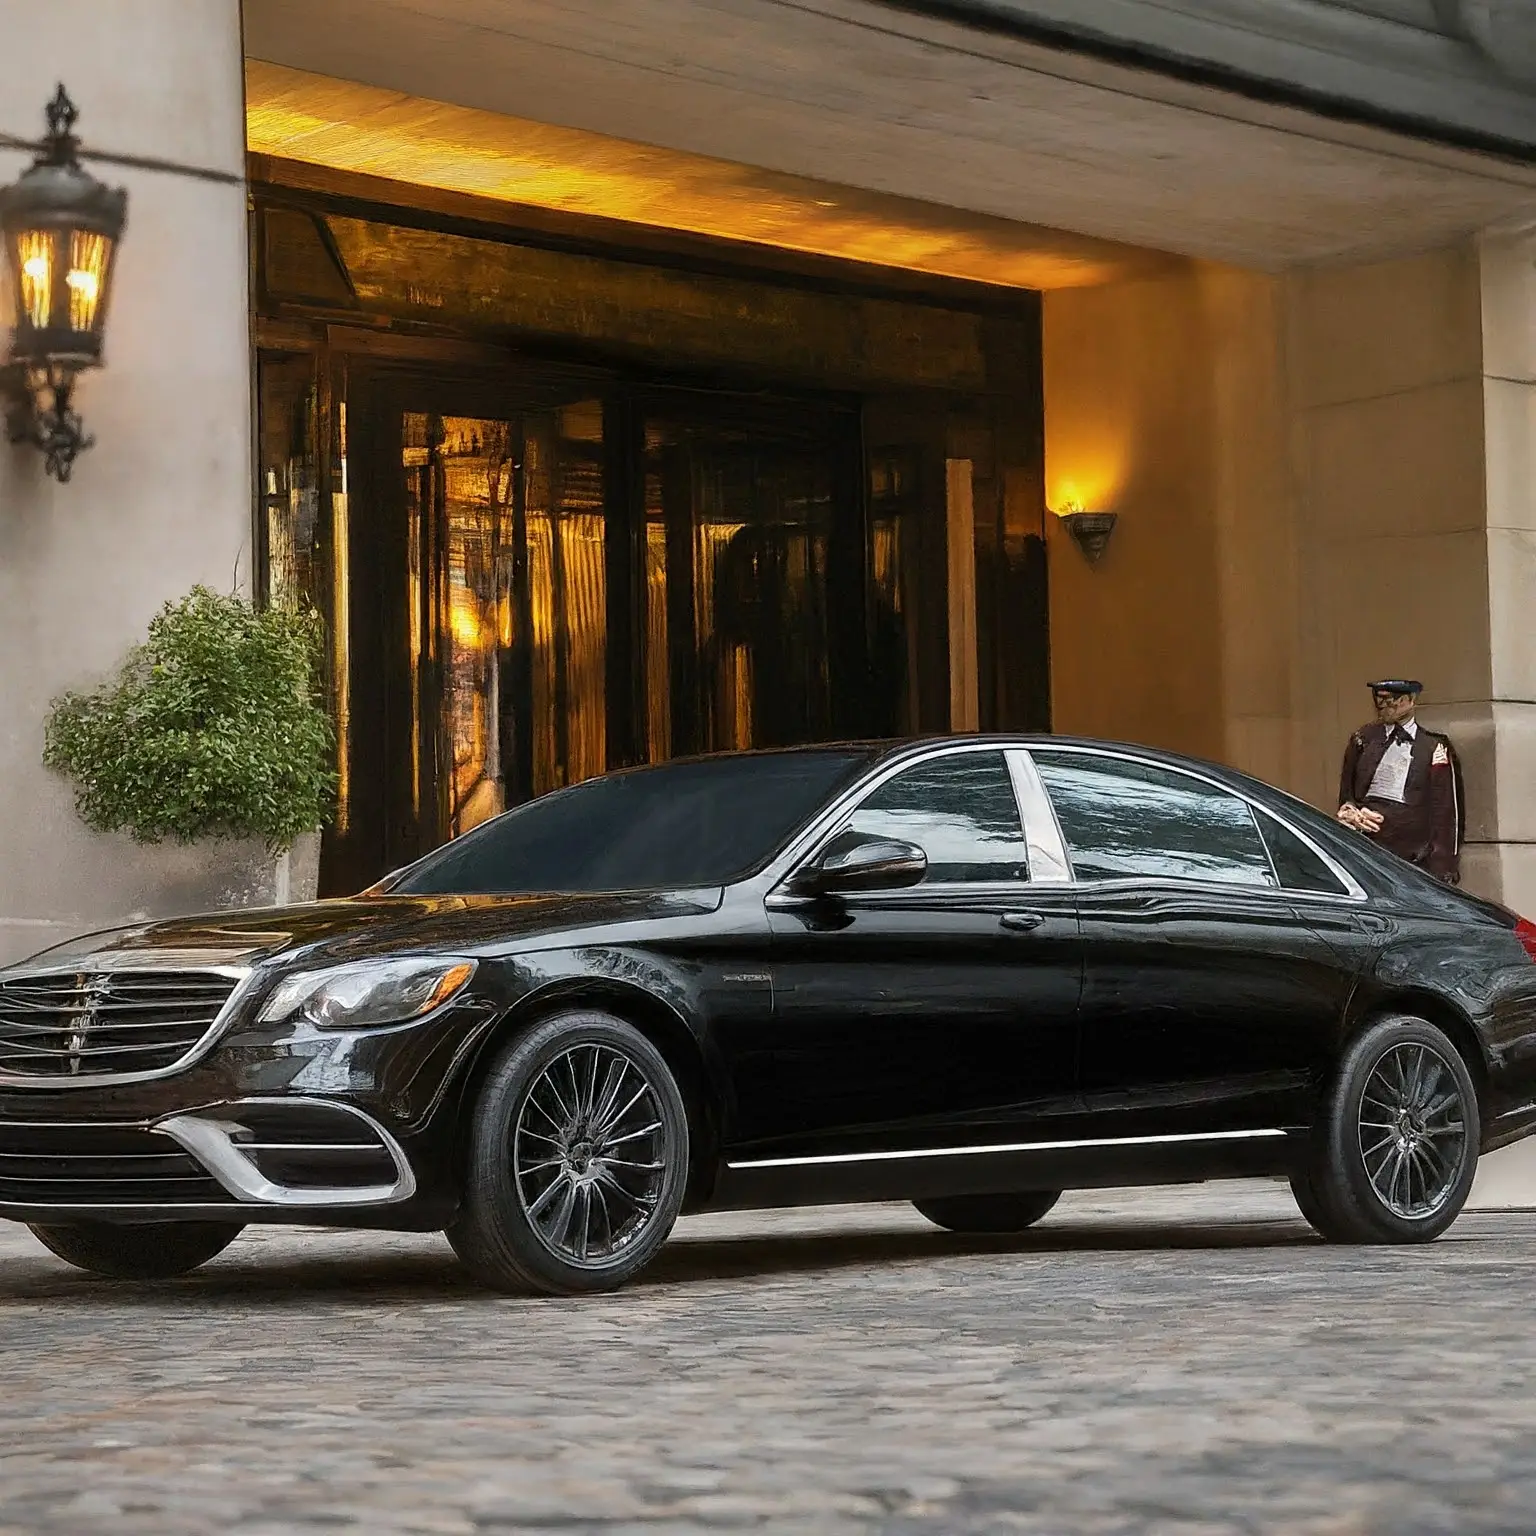 A sleek black sedan parked curbside at a luxurious hotel entrance. A uniformed chauffeur stands by the car door waiting for a passenger.